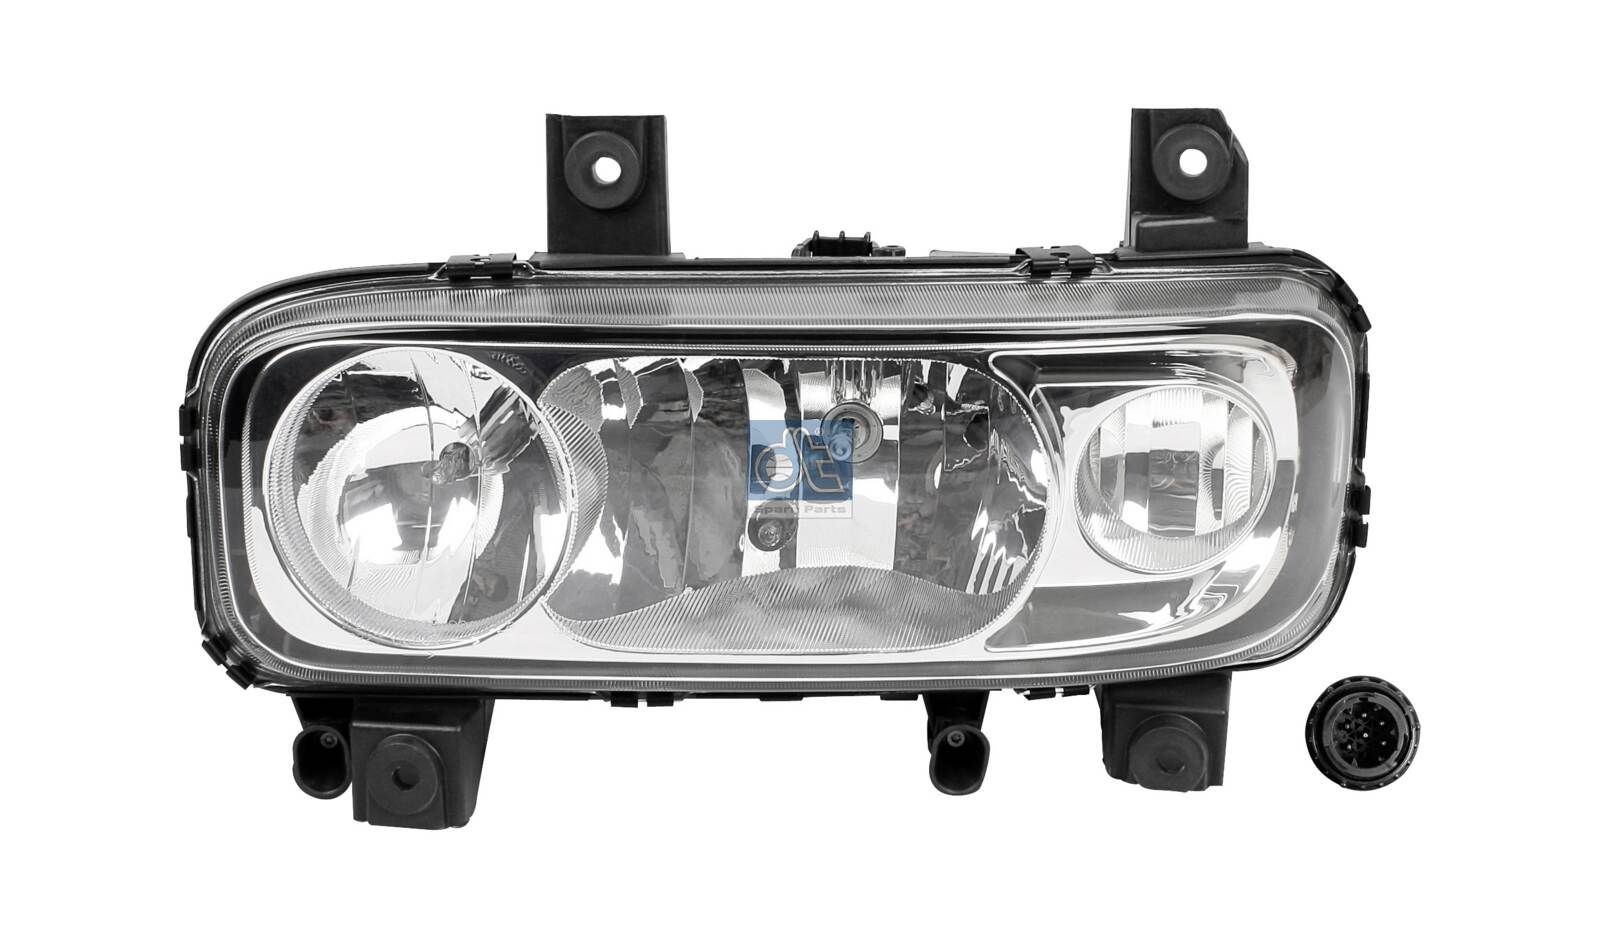 DT Spare Parts 4.64446 Headlight A 973 820 22 61